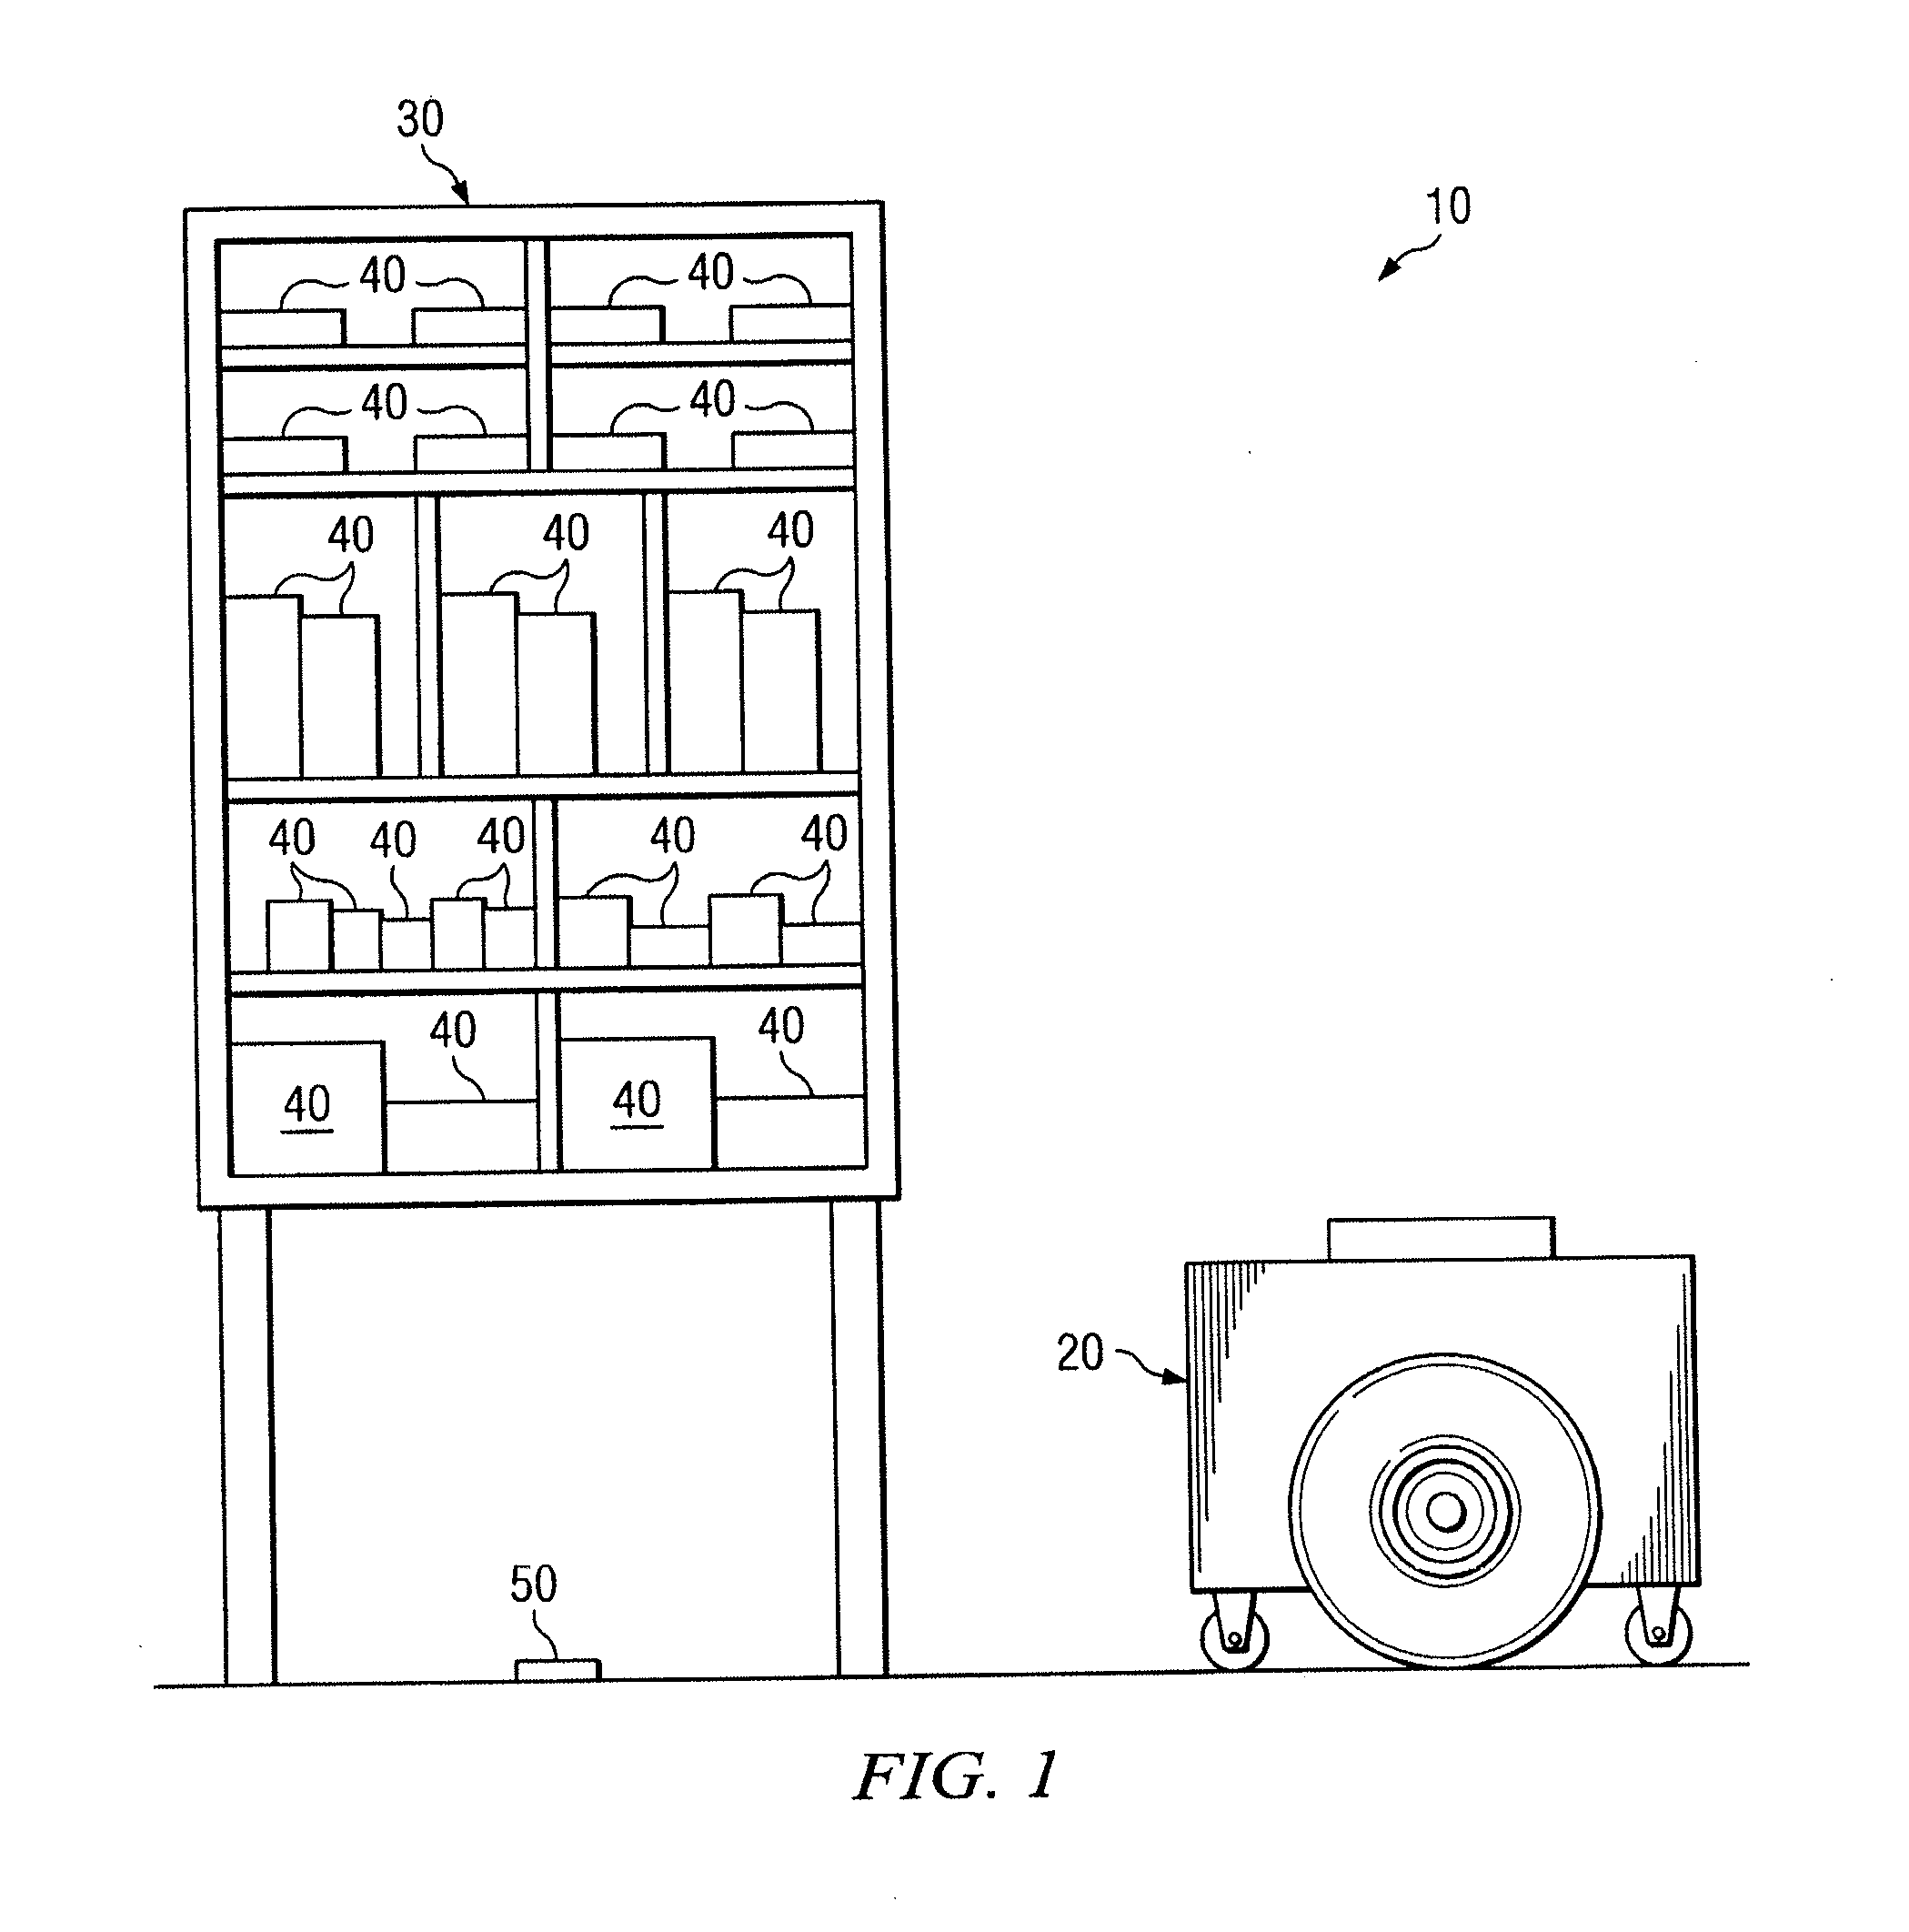 Method and system for transporting inventory items